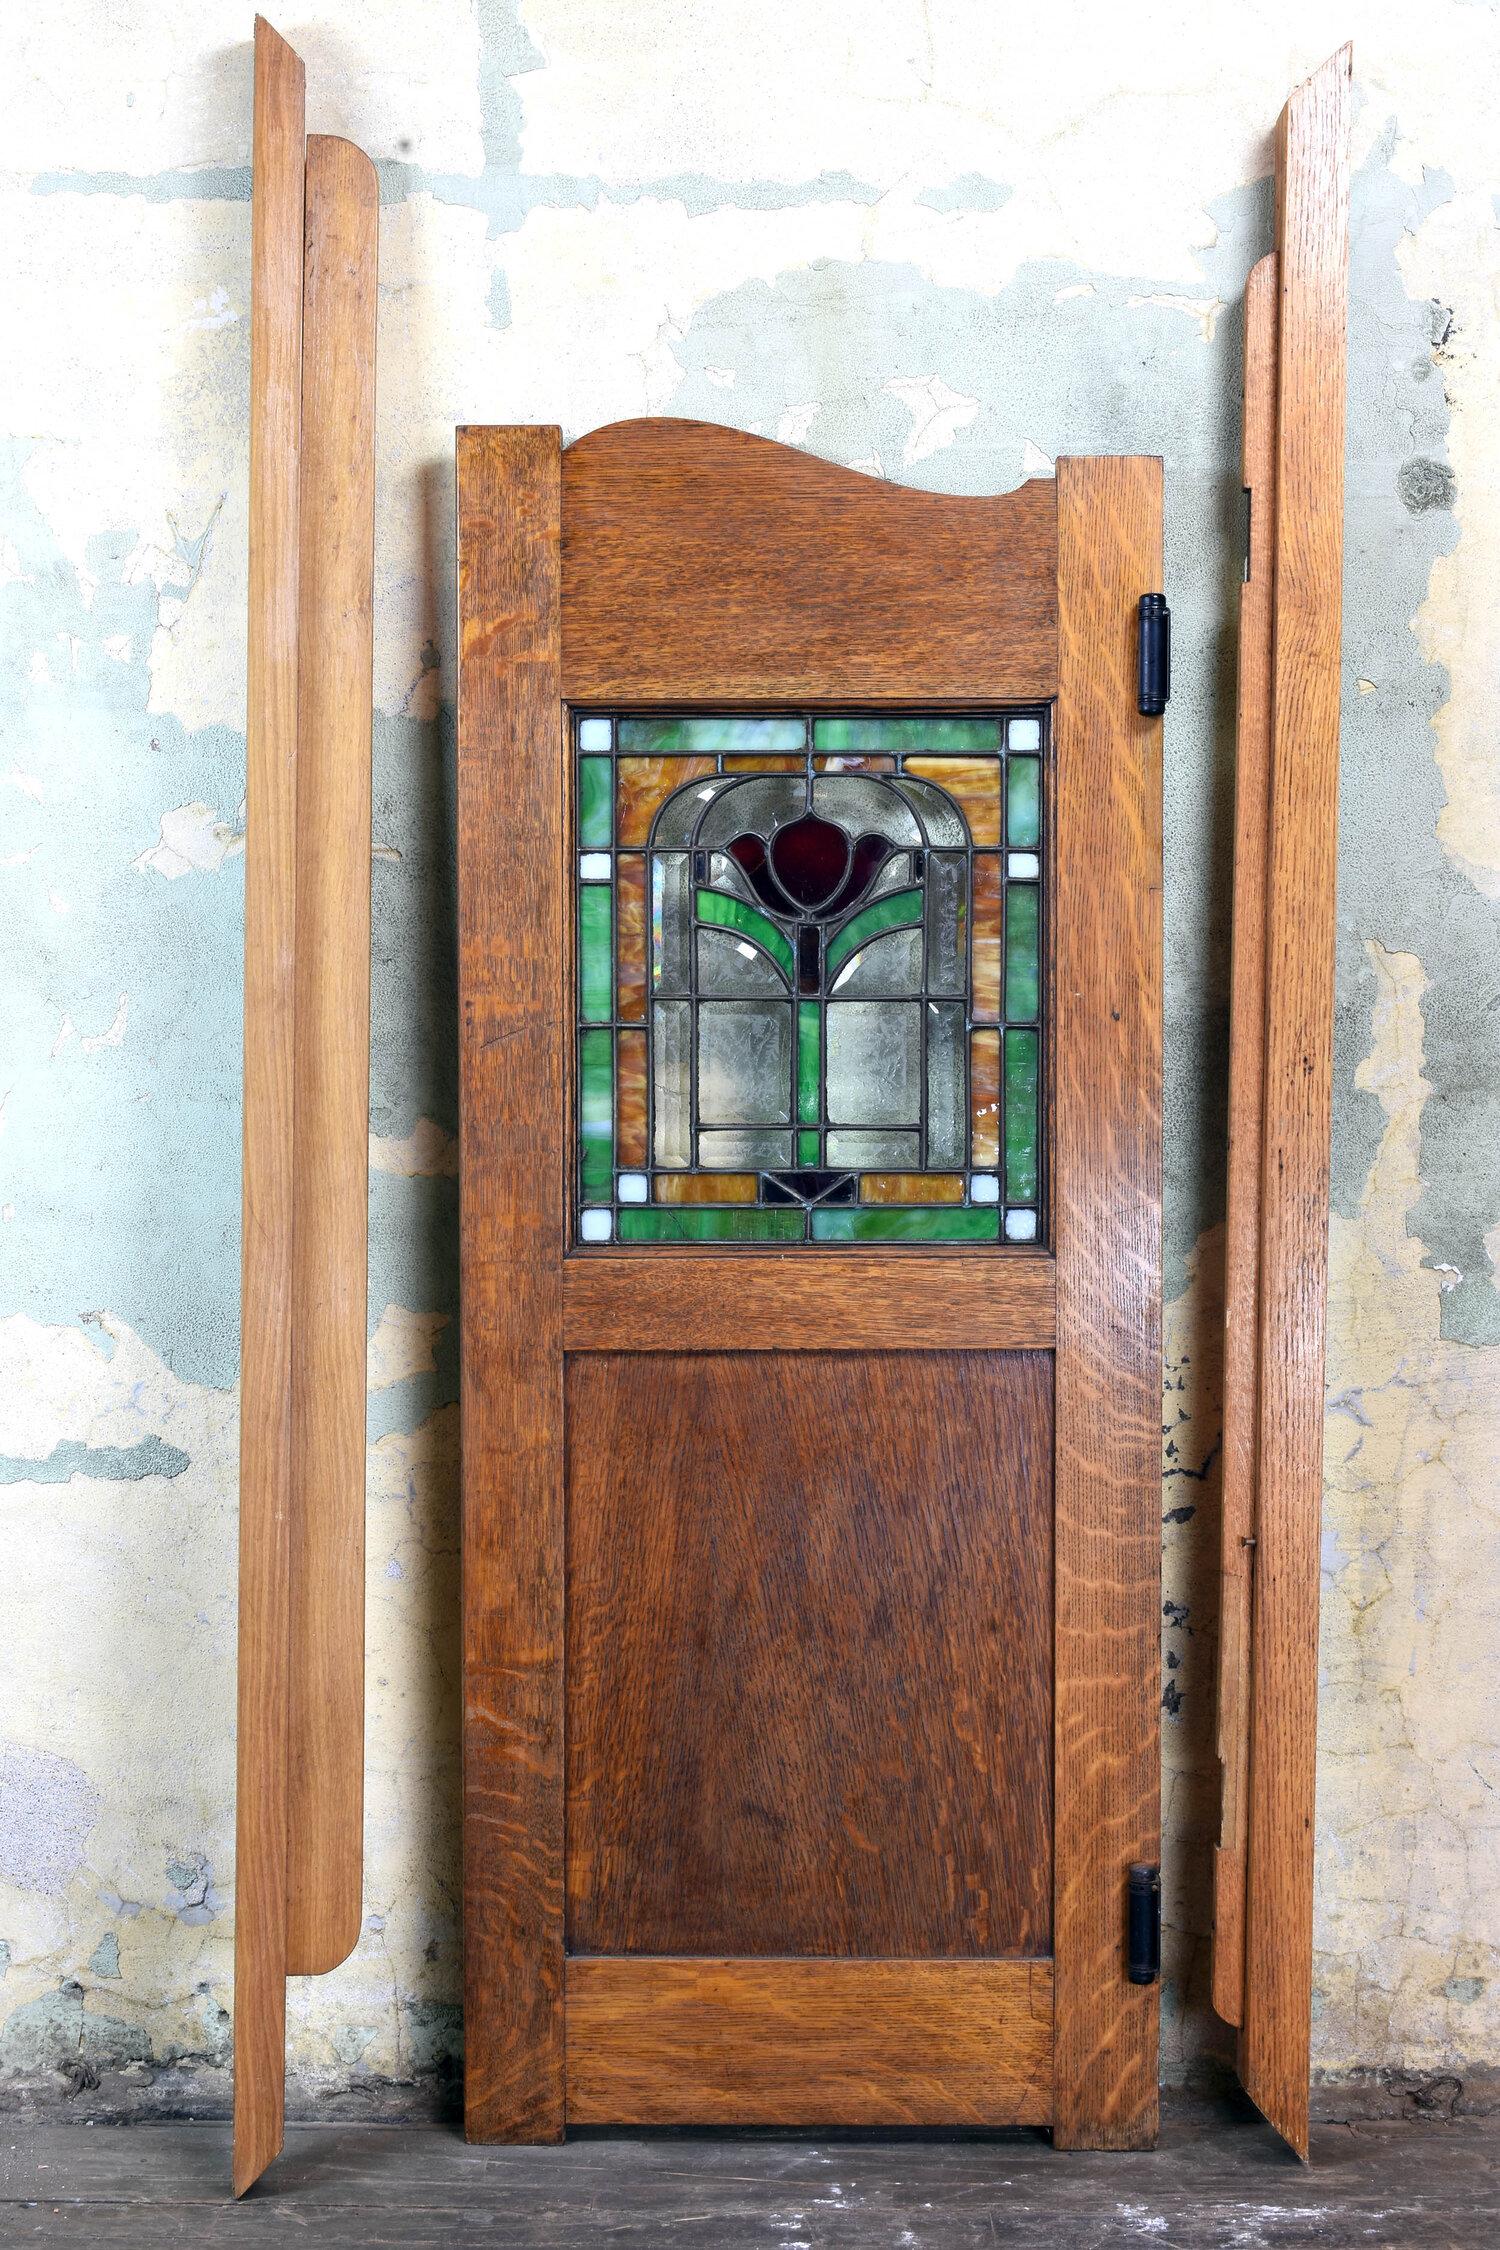 So many uses for this stained and bevelled glass tiger cut oak pub door. Entrance to your home bar, pantry or just a divide from one section of your home to another. The side wood pieces are the jamb for the door. It is meant to hang in a space with